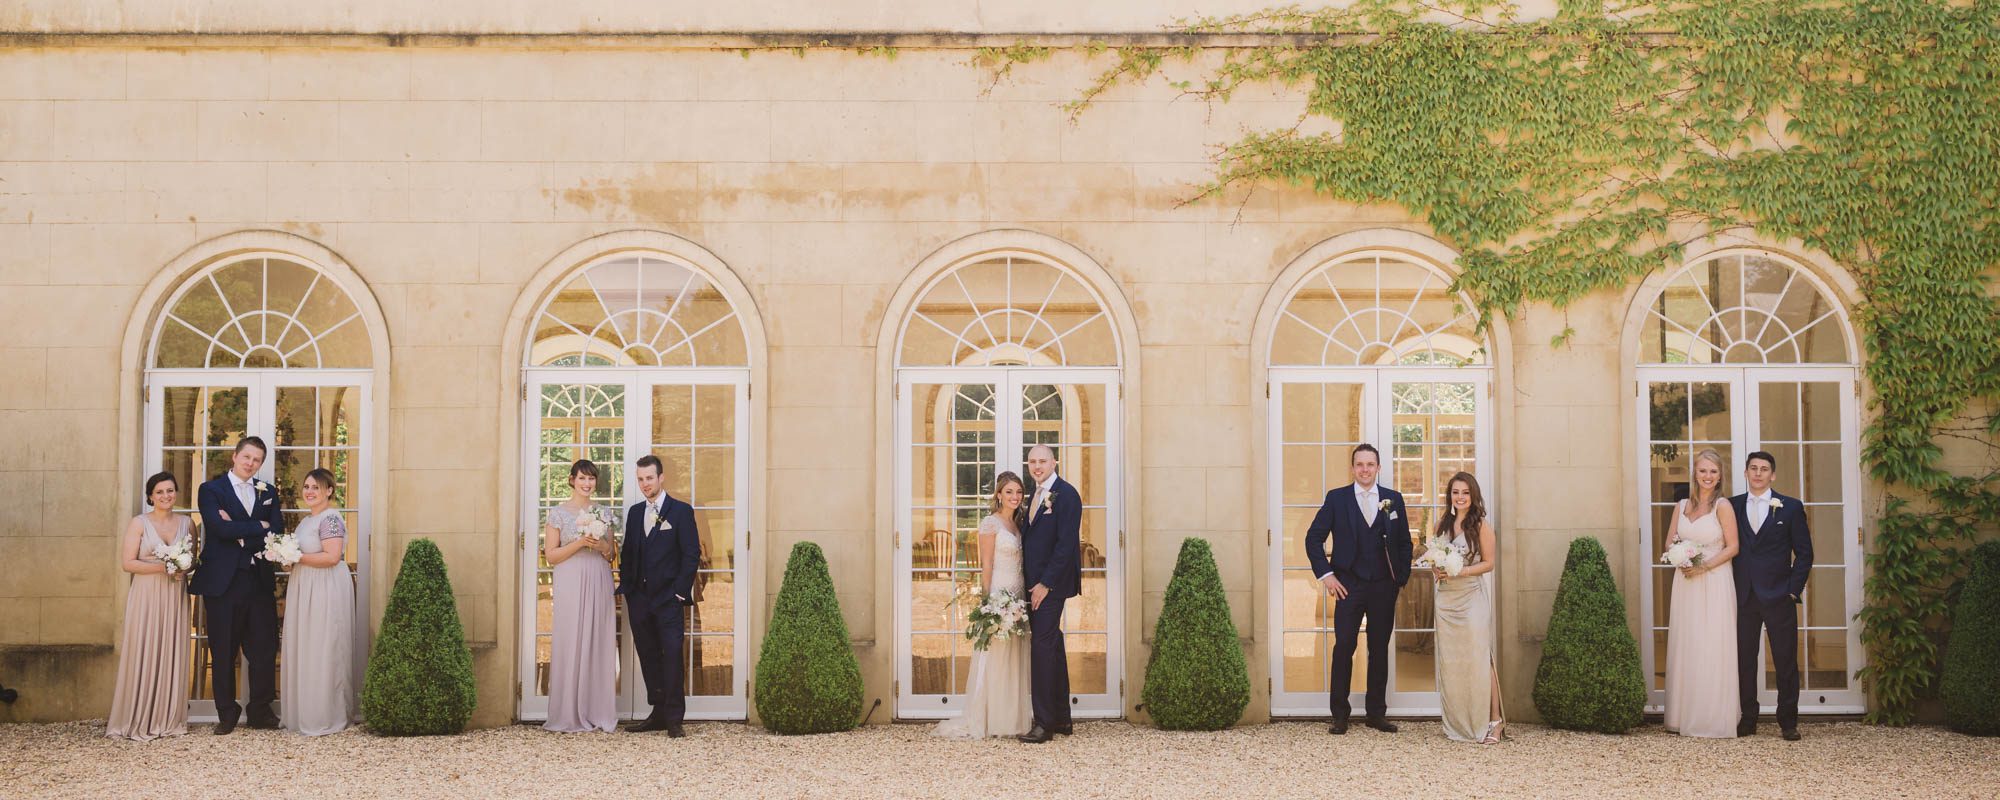 The bridal party outside the Vine Room at Northbrook Park.